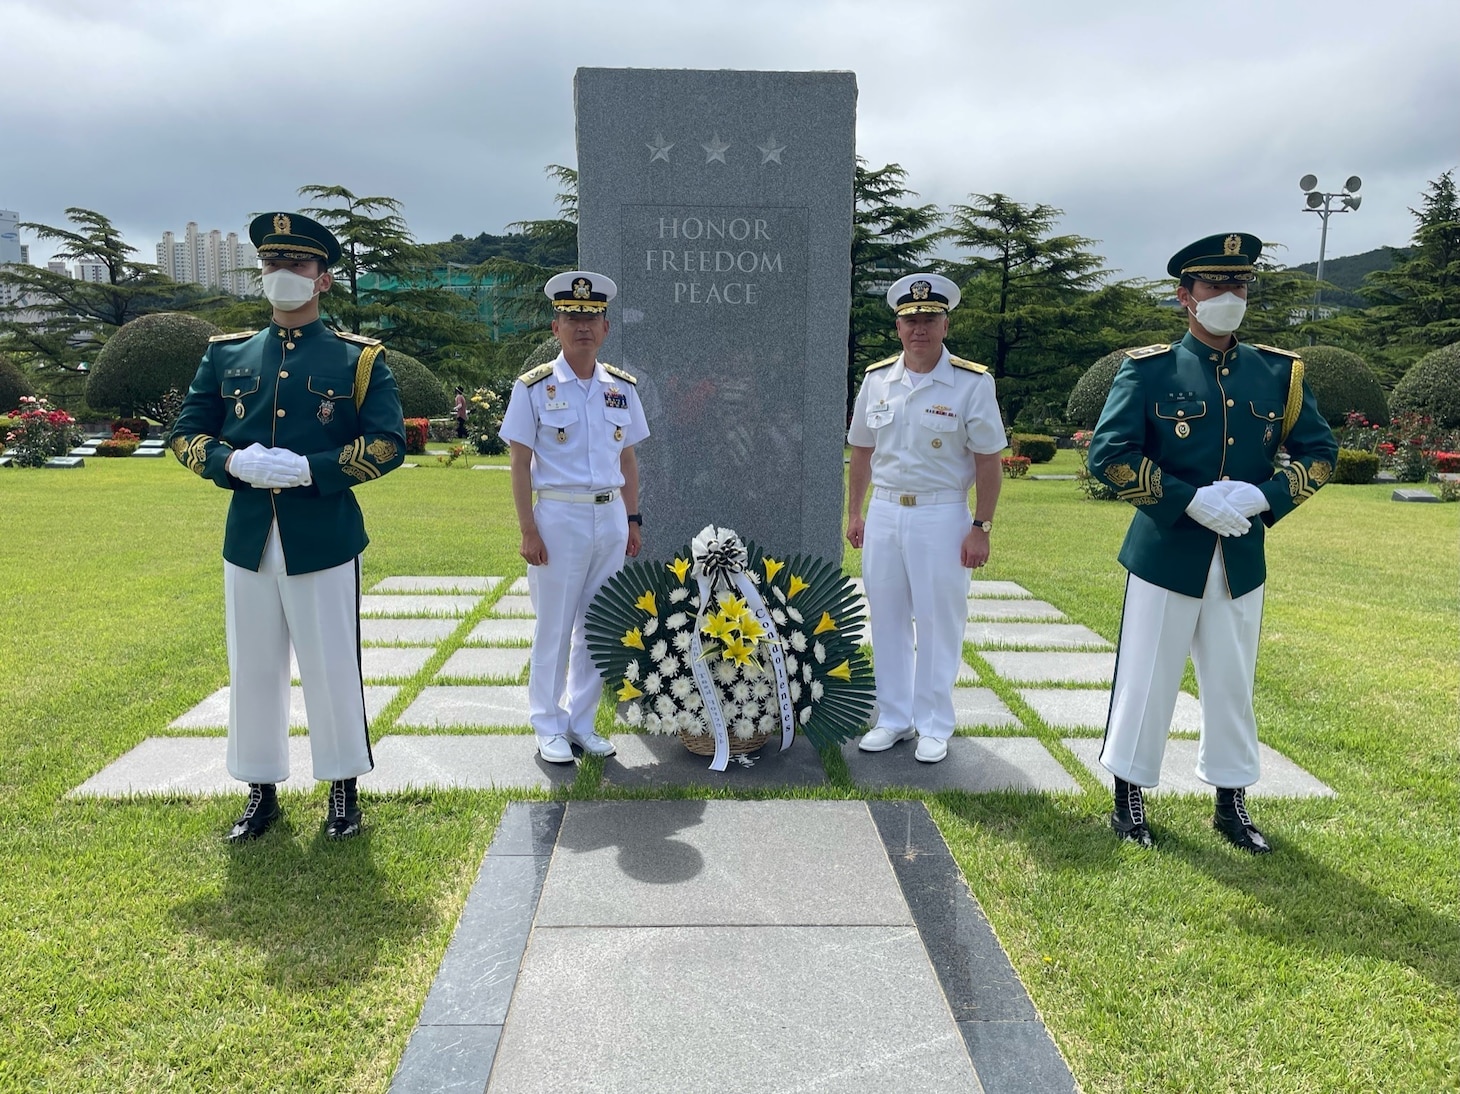 BUSAN, Republic of Korea (June 21, 2022) Rear Adm. Rick Seif, Commander, Submarine Group 7, right, and Rear Adm. Lee Su Youl, Commander, Republic of Korea (ROK) Navy Submarine Force, place a wreath at the United Nations Memorial Cemetery in Korea (UNMCK) in honor of those UN Forces that gave their lives for world peace and freedom, June 21, 2022. The UNMCK, where more than 2,300 service members from 16 countries have been interred, is the only United Nations cemetery in the world, and the final resting place for United Nations Command (UNC) veterans of the Korean War. Seif visited UNMCK as part of his trip to Korea for the 54th Submarine Warfare Committee Meeting (SWCM). (Photo courtesy of Lt. Haley Bonner)